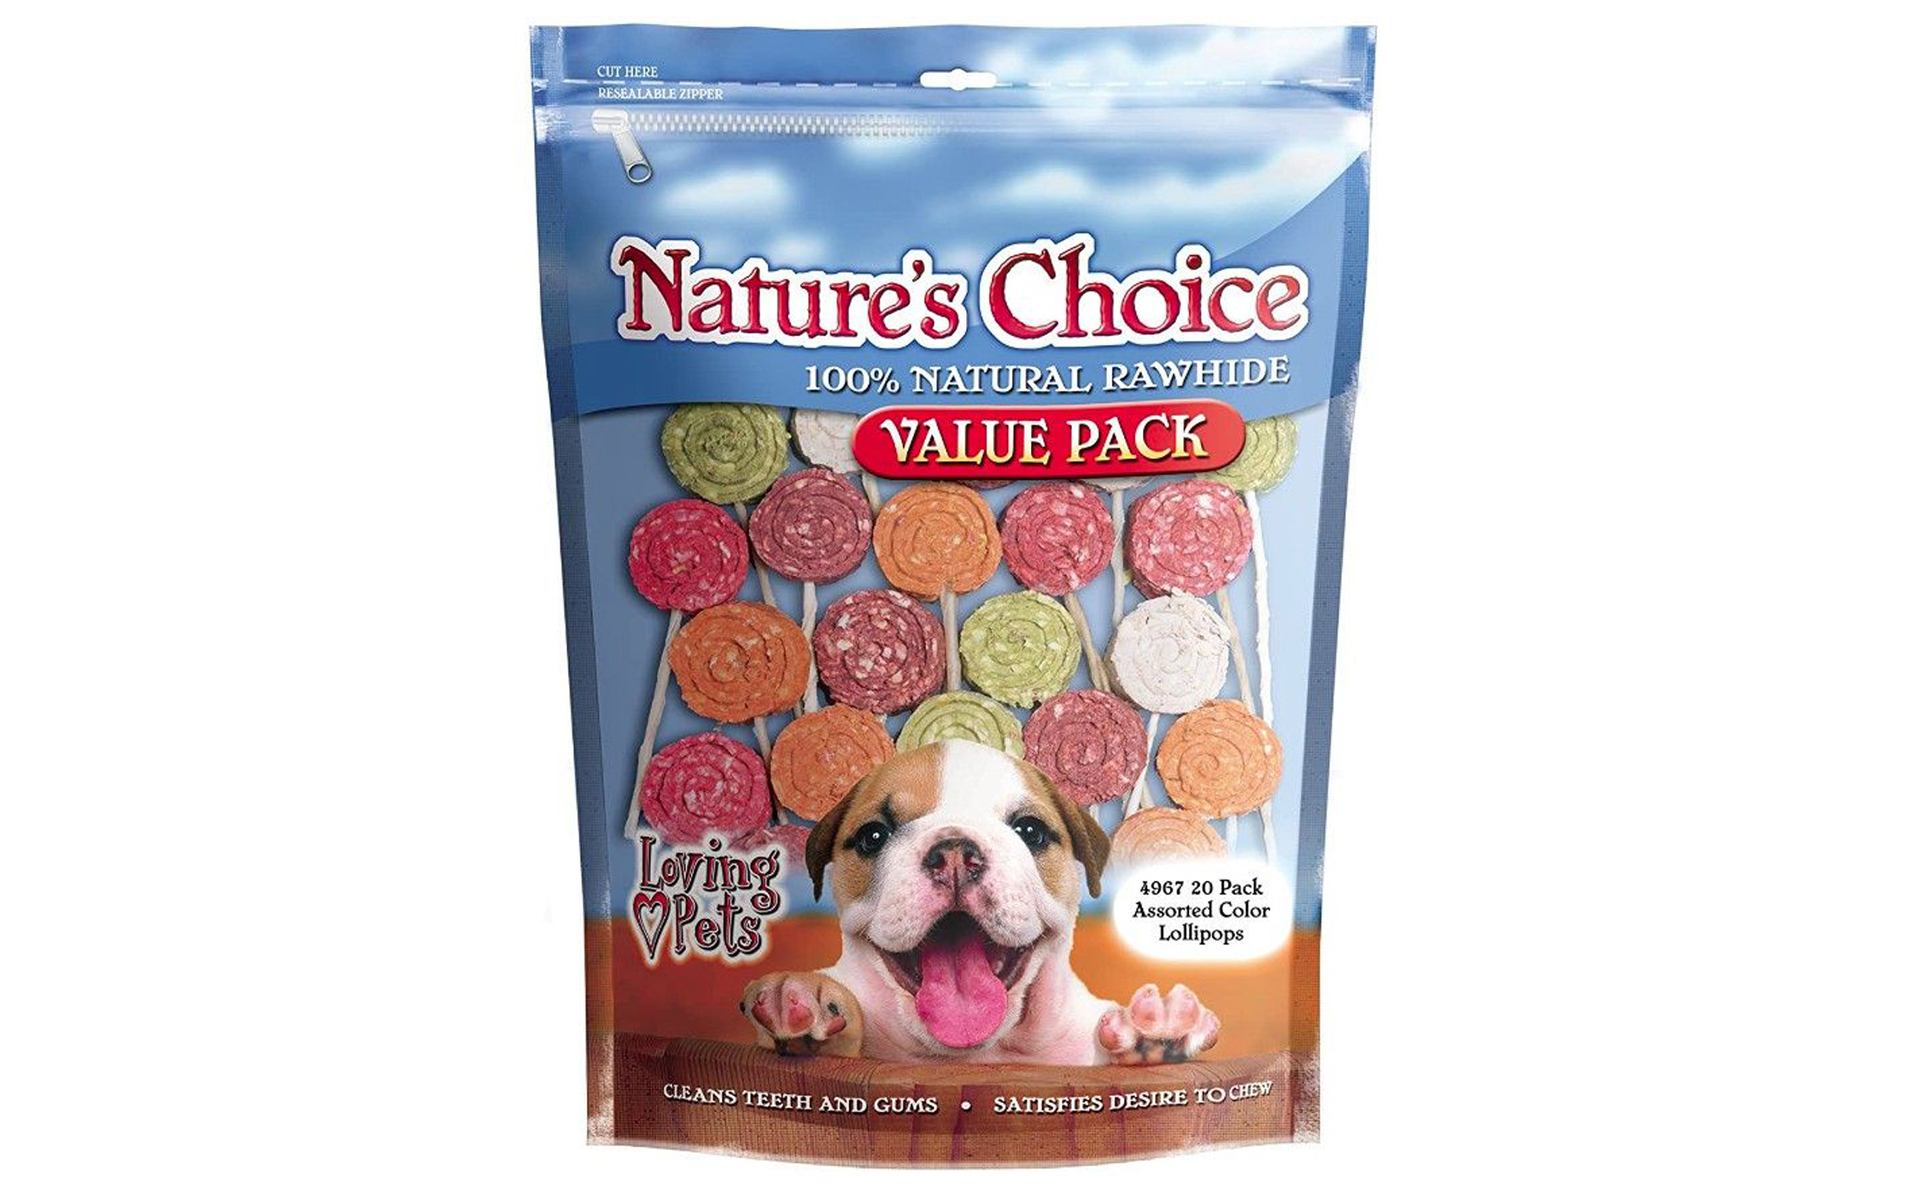 Nature's Choice Natural Rawhide Munchy Lollipops, 20 Pack